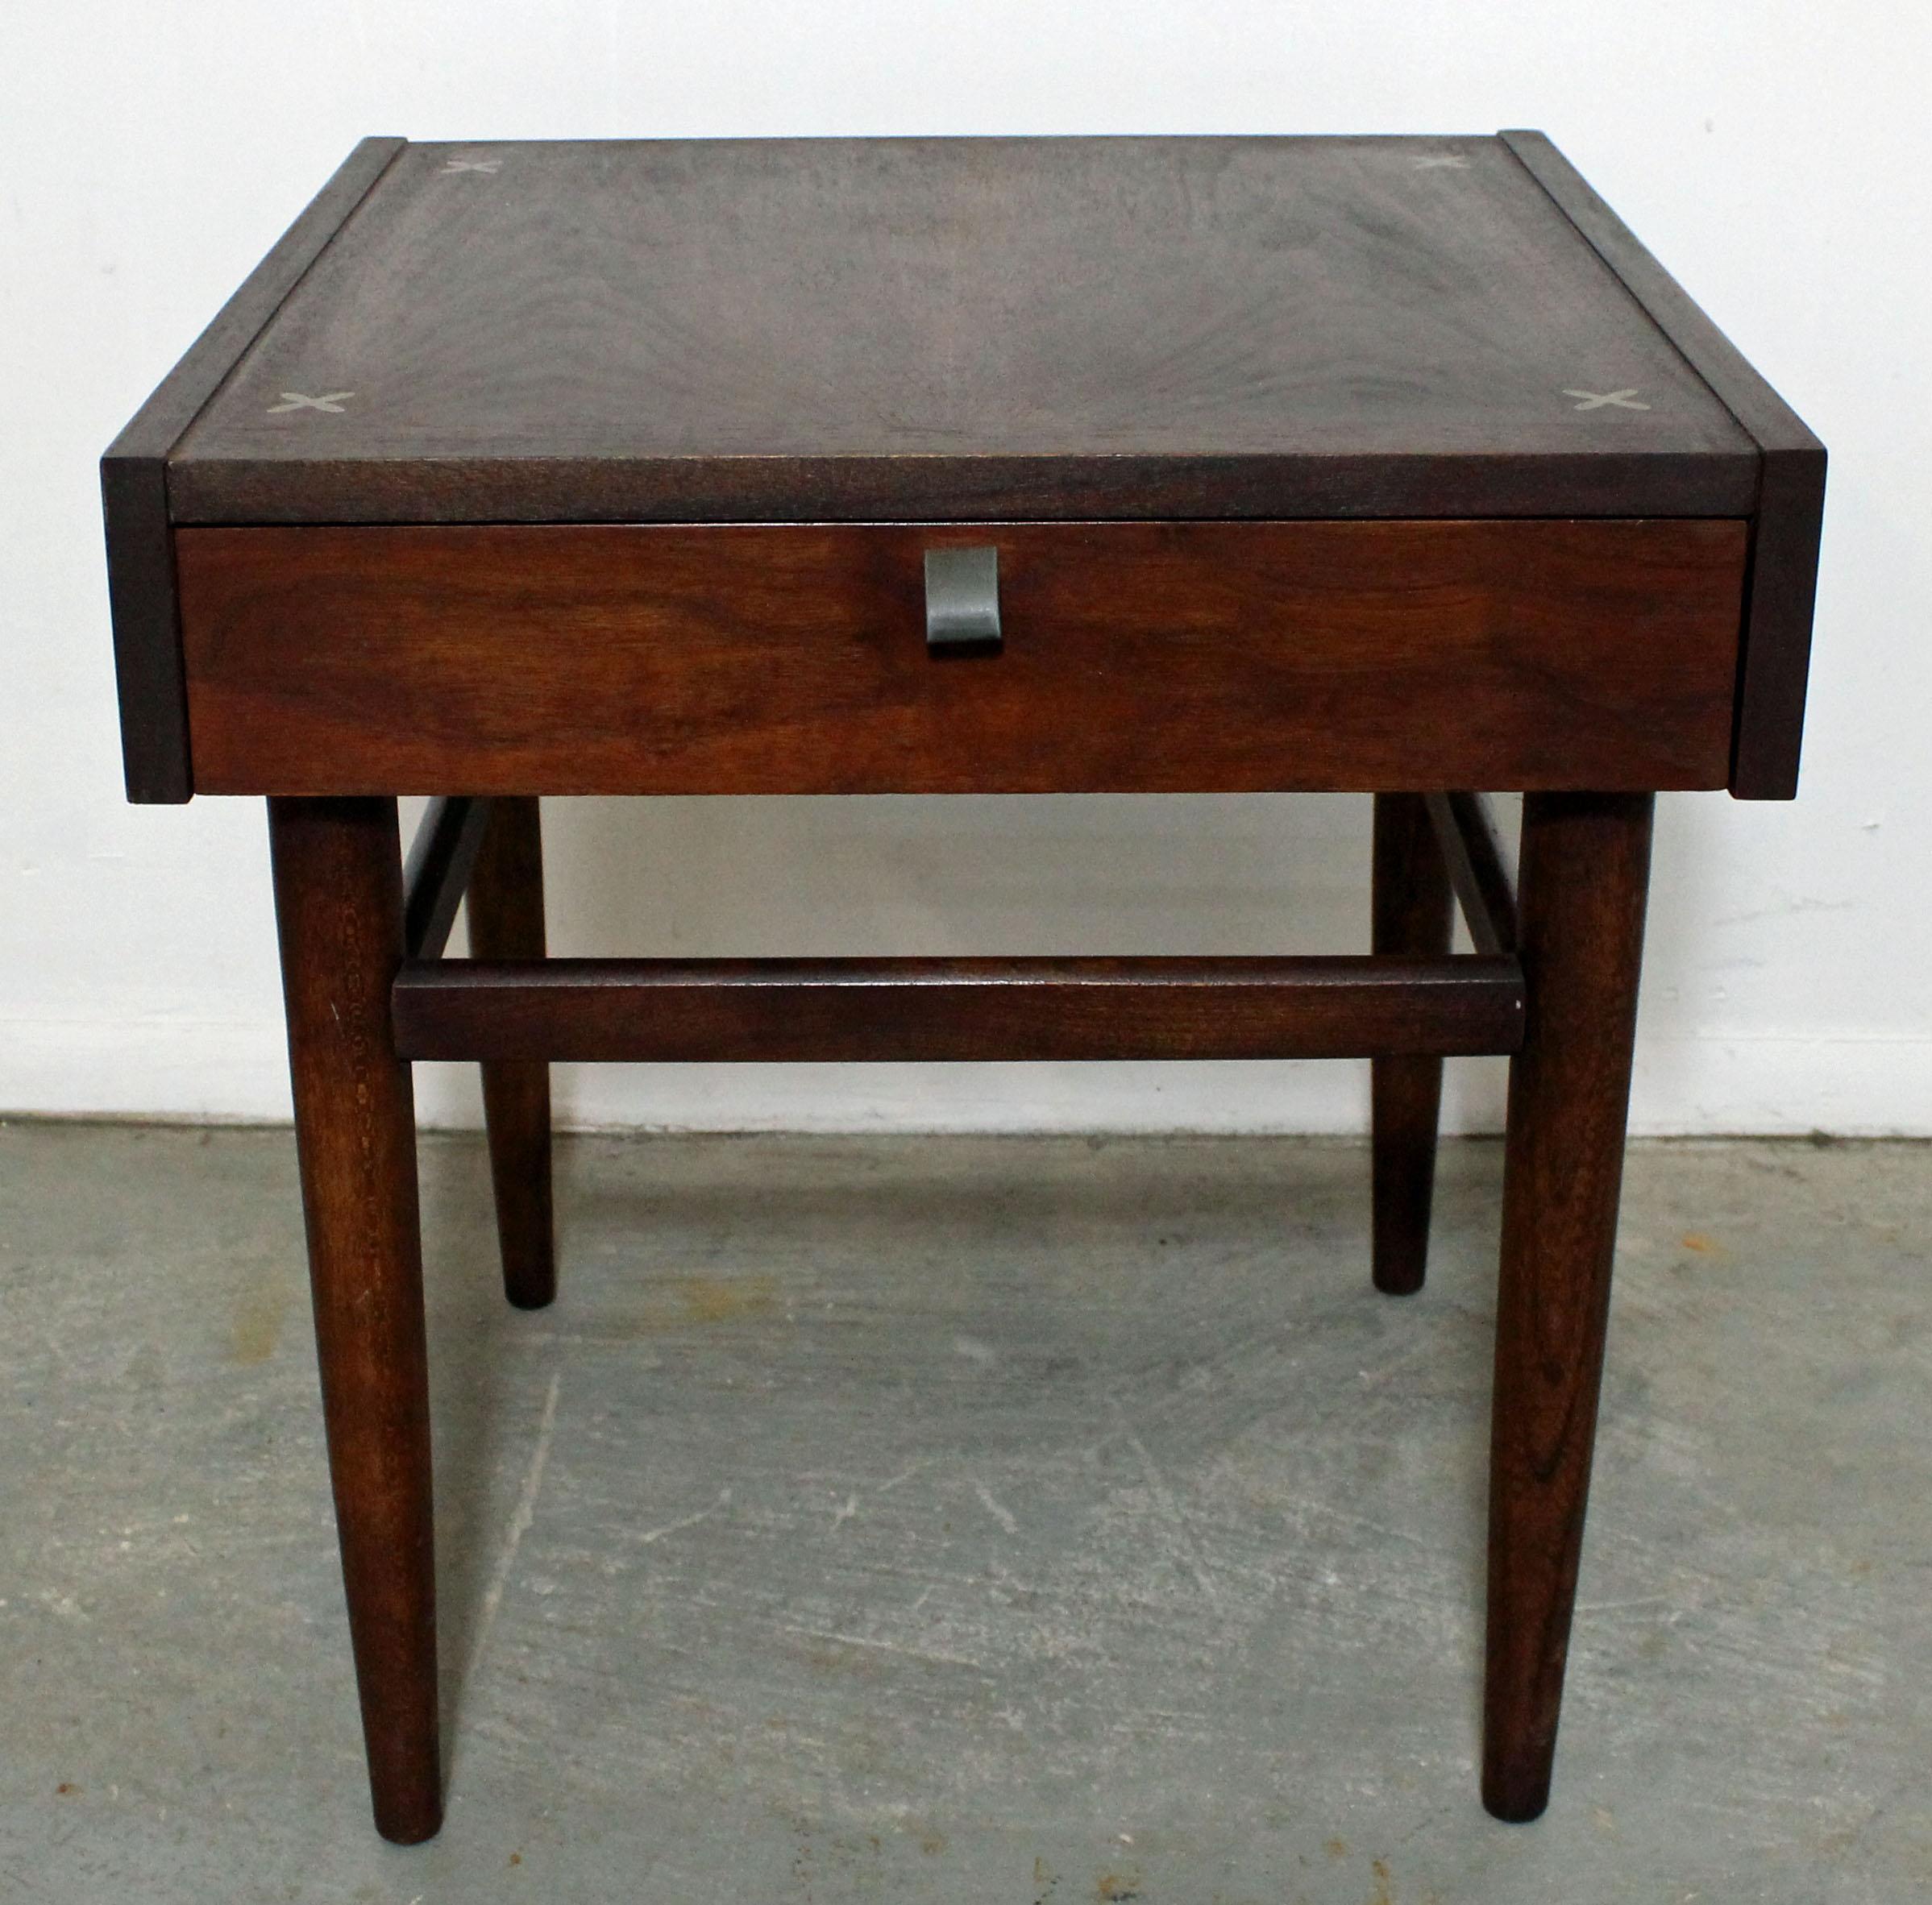 Offered is a walnut end table designed by Merton L. Gershun for American of Martinsville. Features one drawer with a brass pull and the iconic x-shaped brushed aluminium inlaid detailing in the tabletop. It is in very good condition, shows some